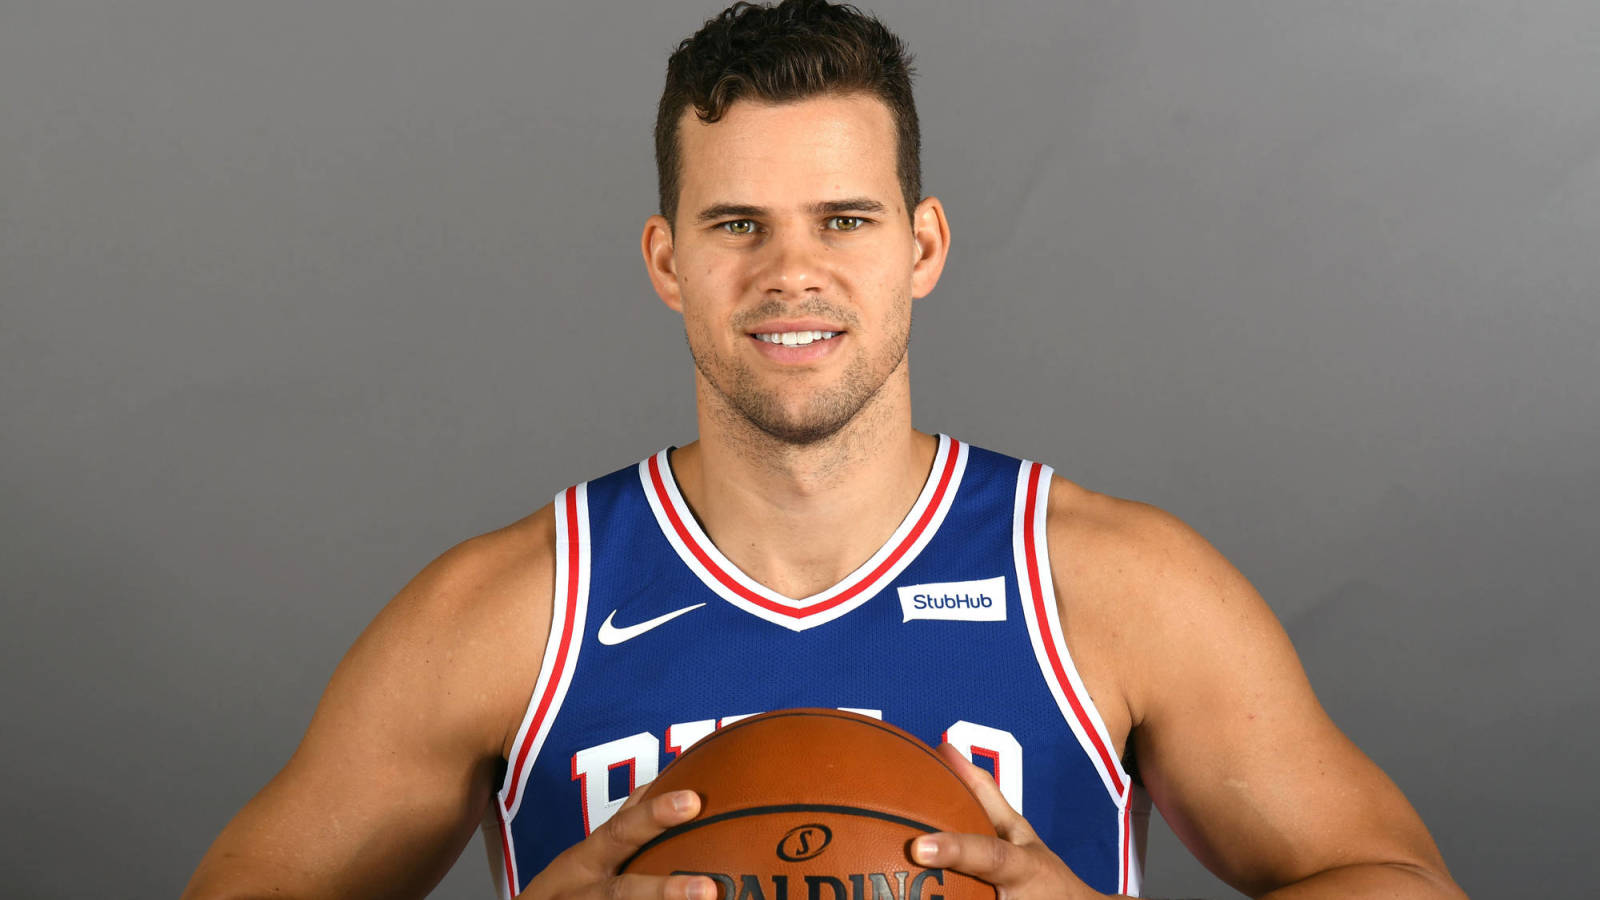 Kris Humphries officially announces retirement from NBA | Yardbarker